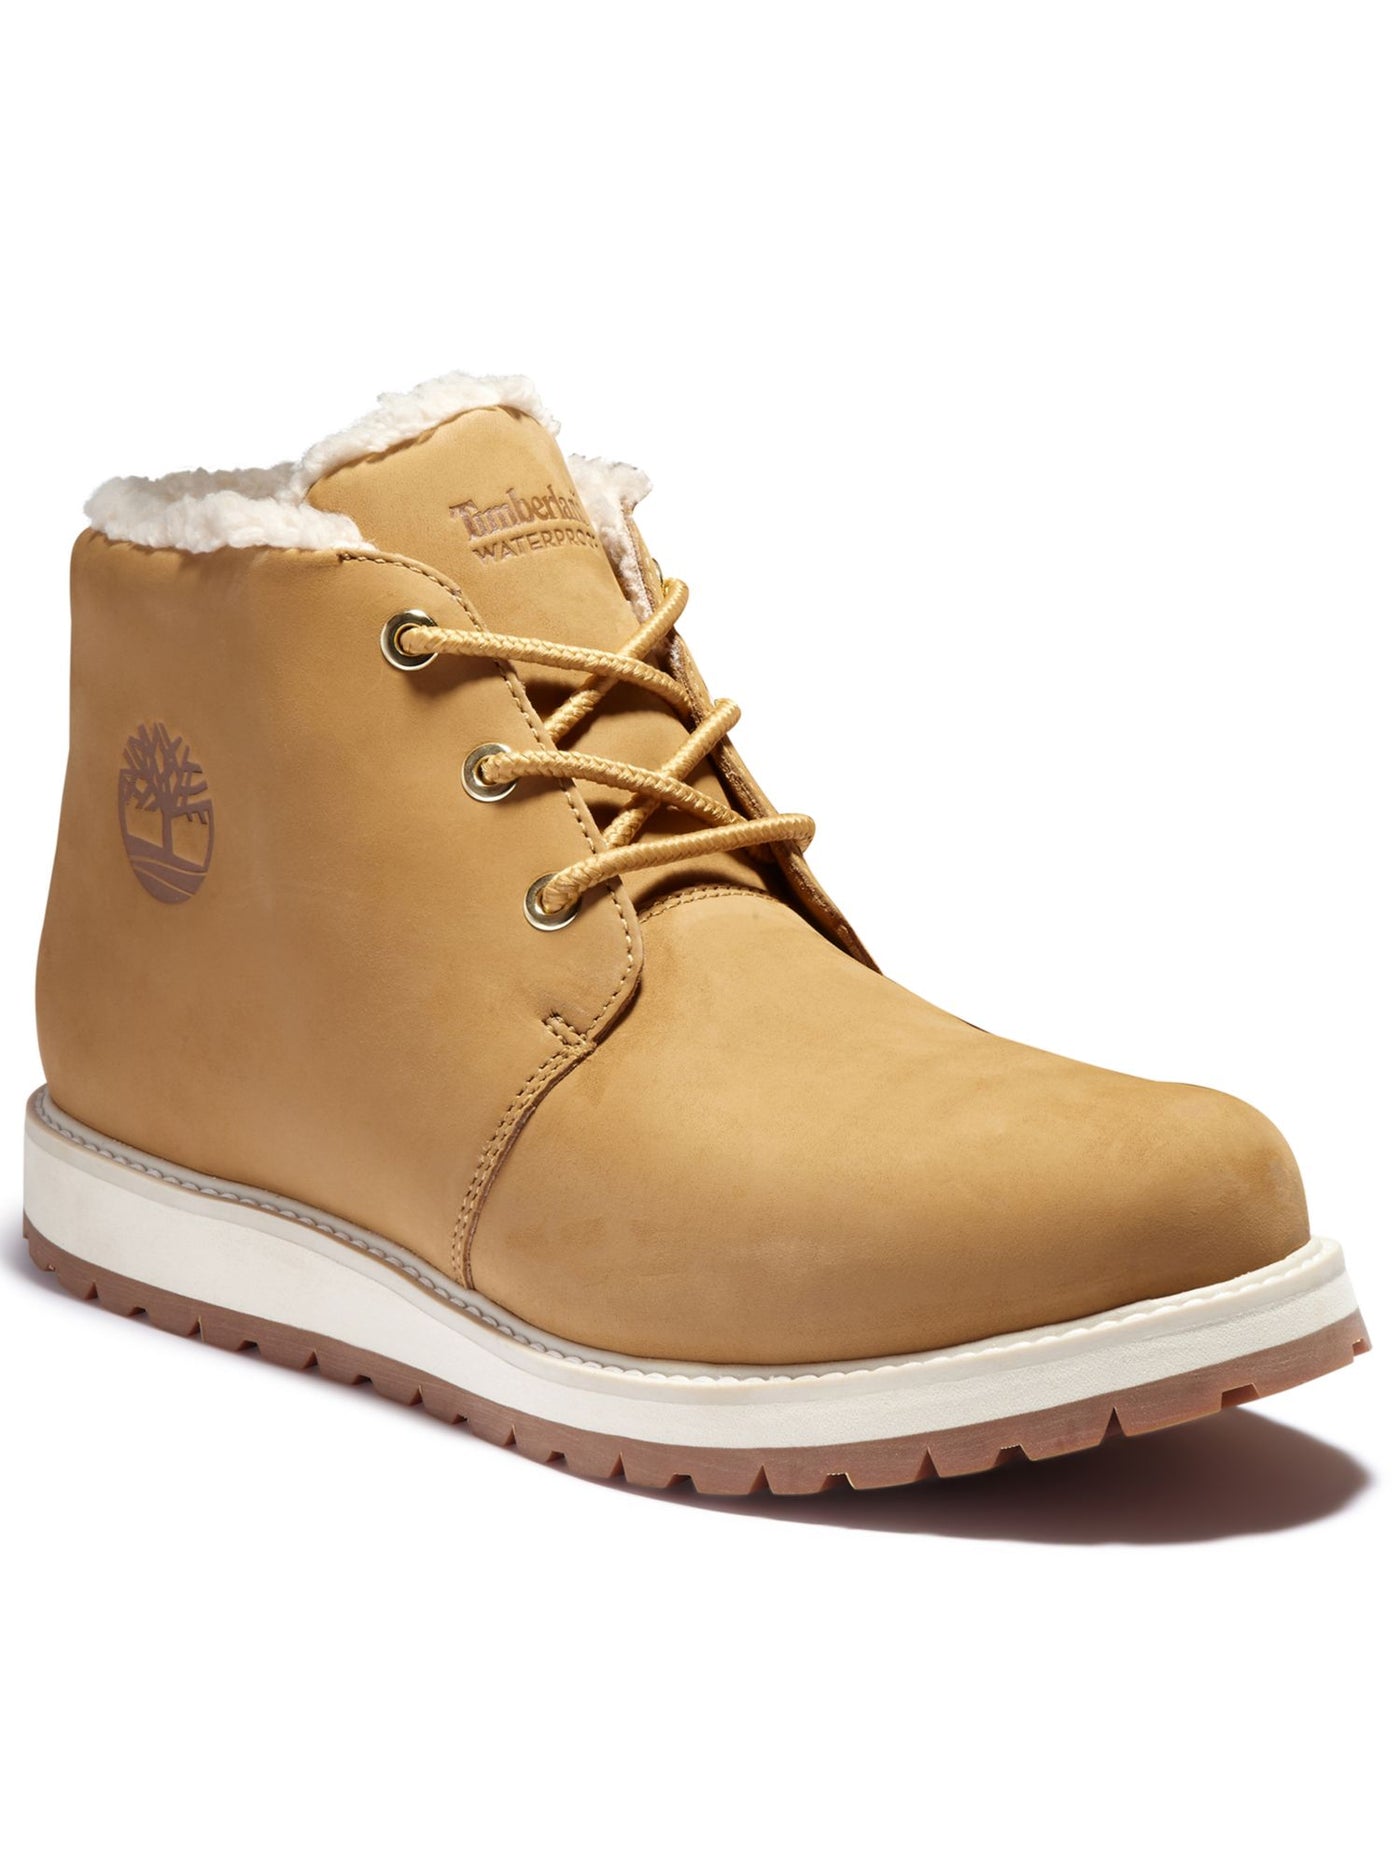 TIMBERLAND Mens Beige Water Resistant Lug Sole Richmond Ridge Round Toe Wedge Lace-Up Leather Chukka Boots 9 M